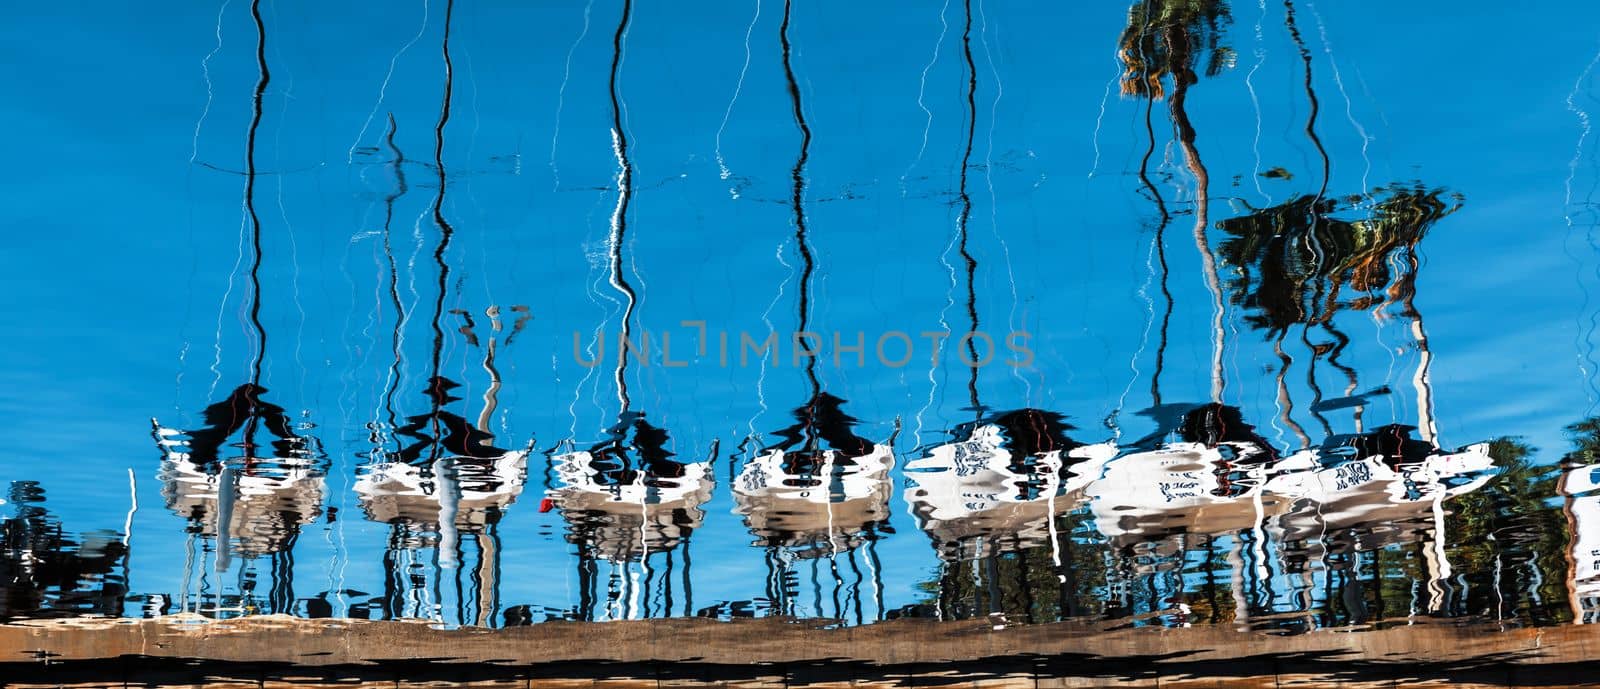 Water reflection of the line of sailboats docked by palinchak